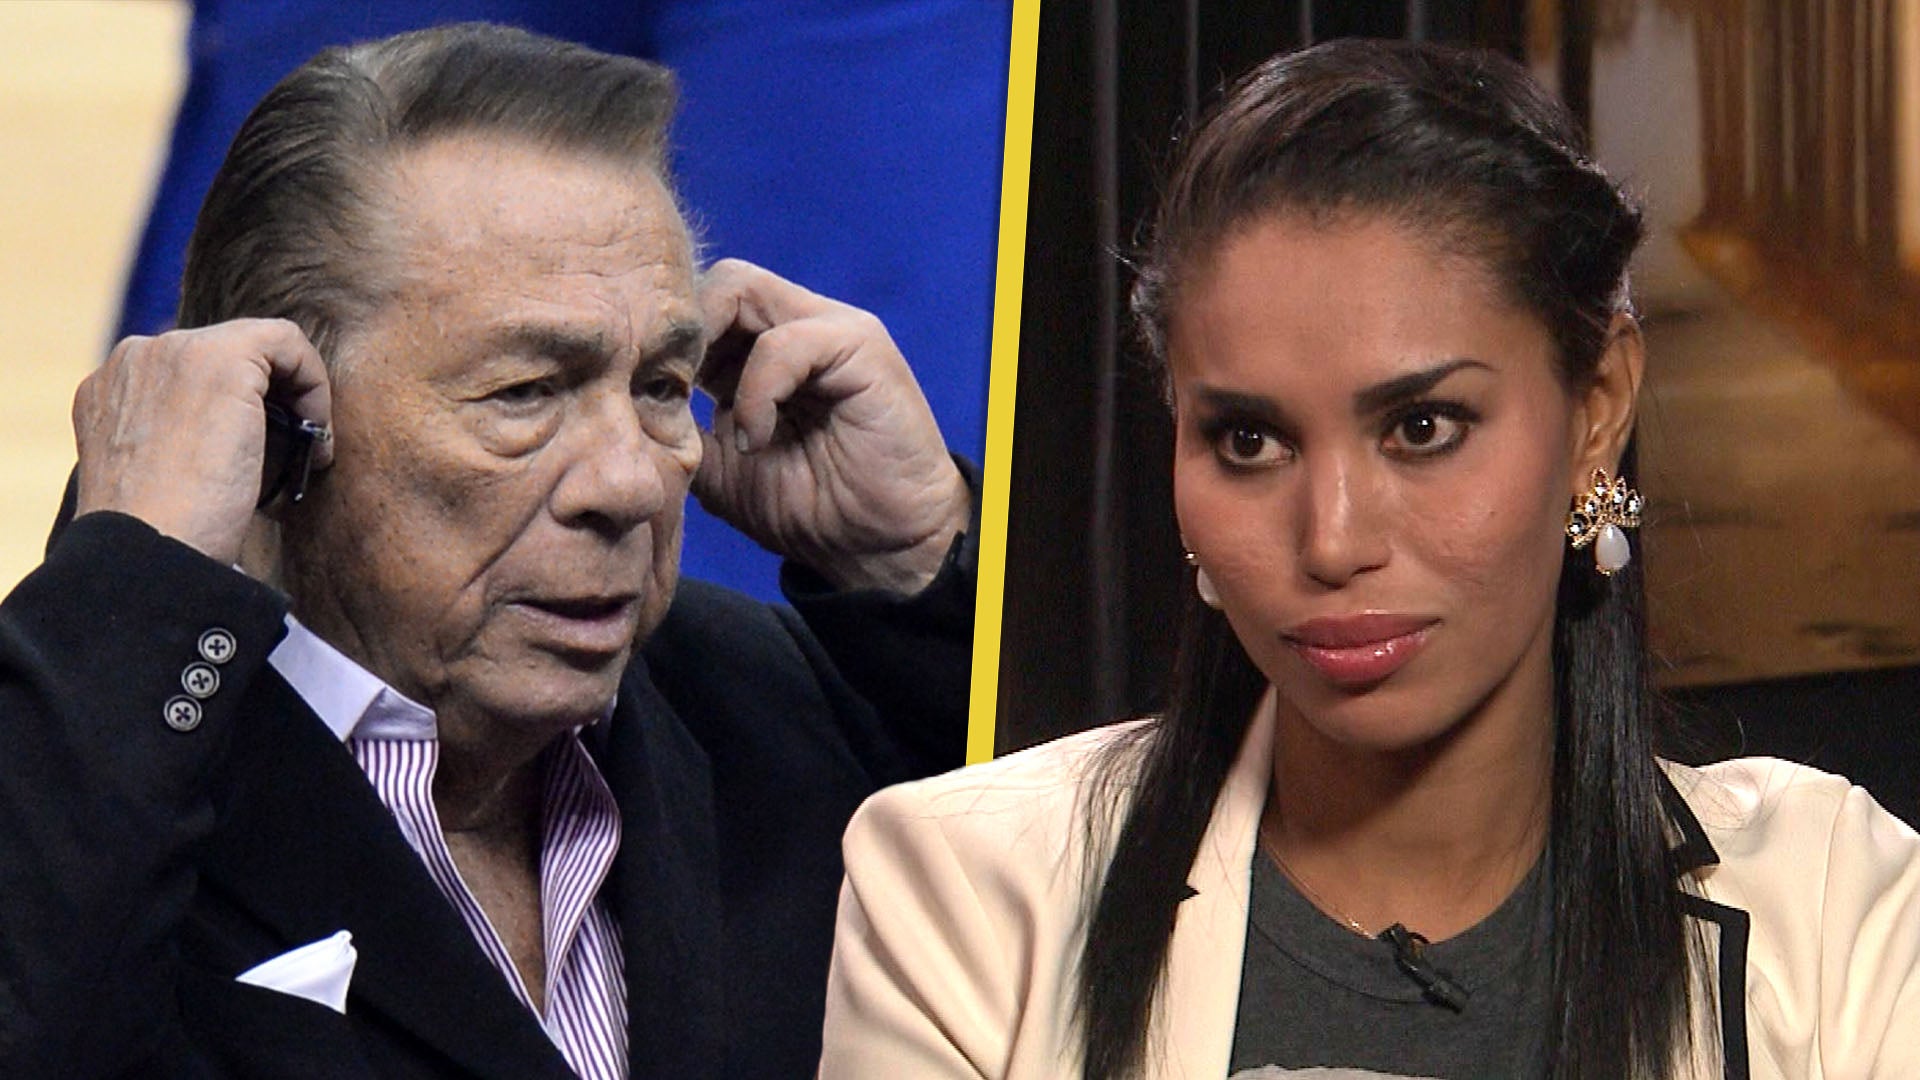 'Clipped': Watch V. Stiviano React to Donald Sterling Scandal, Audio Leak and More in 2014 Sit-Down